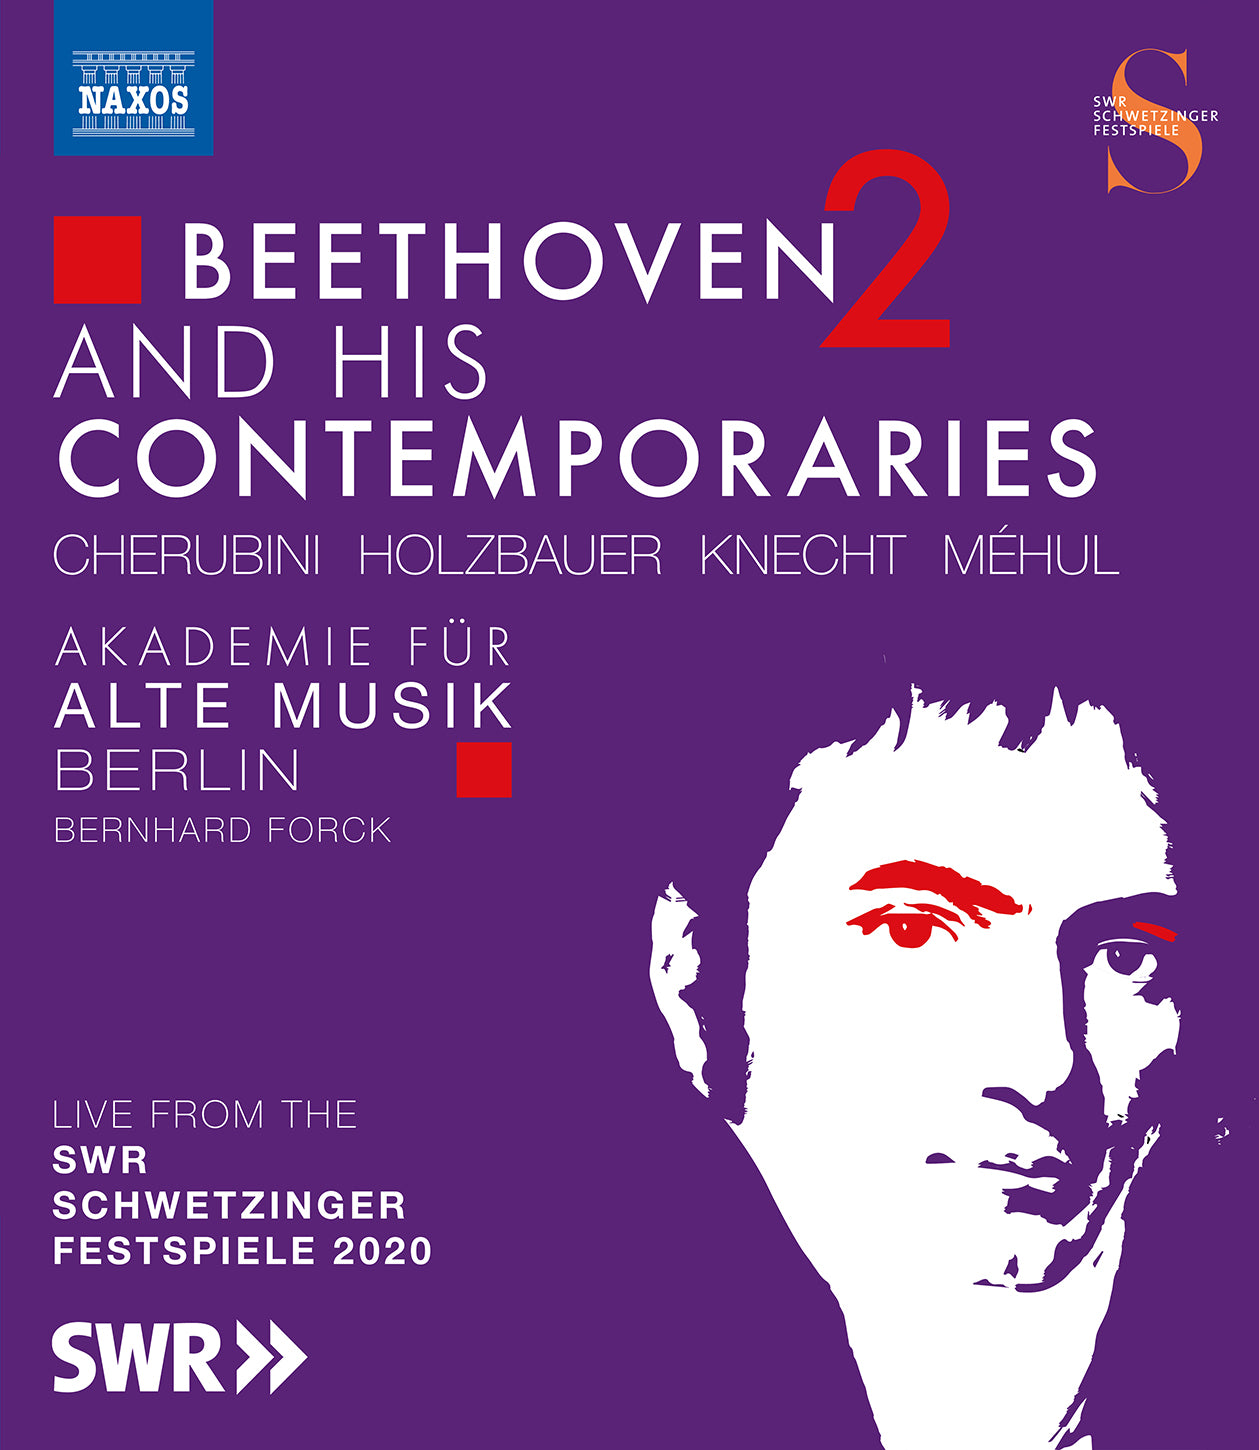 Beethoven and His Contemporaries, Vol. 2 / Forck, Akademie für Alte Musik Berlin [Blu-ray]